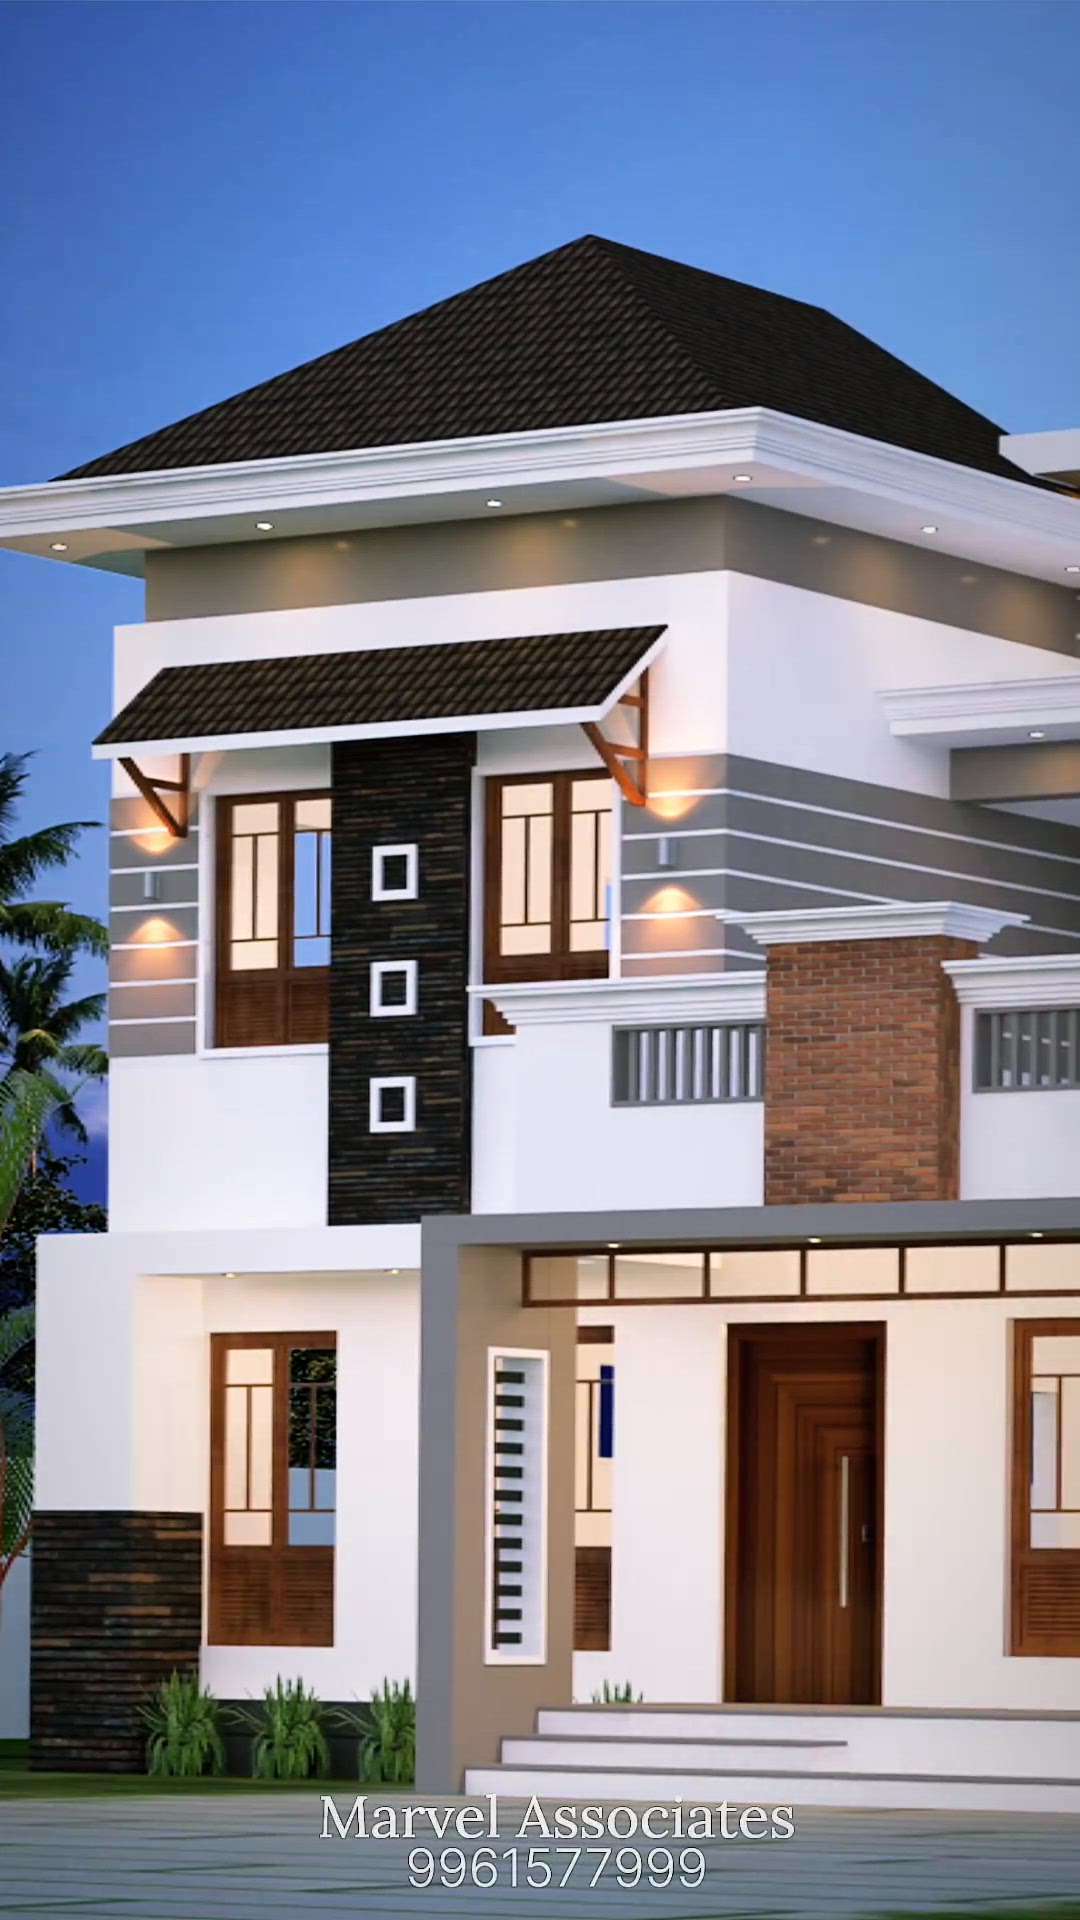 We will design your dream home🏠
Please send your home plan
Contact +91 9961577999
https://wa.me/+919961577999